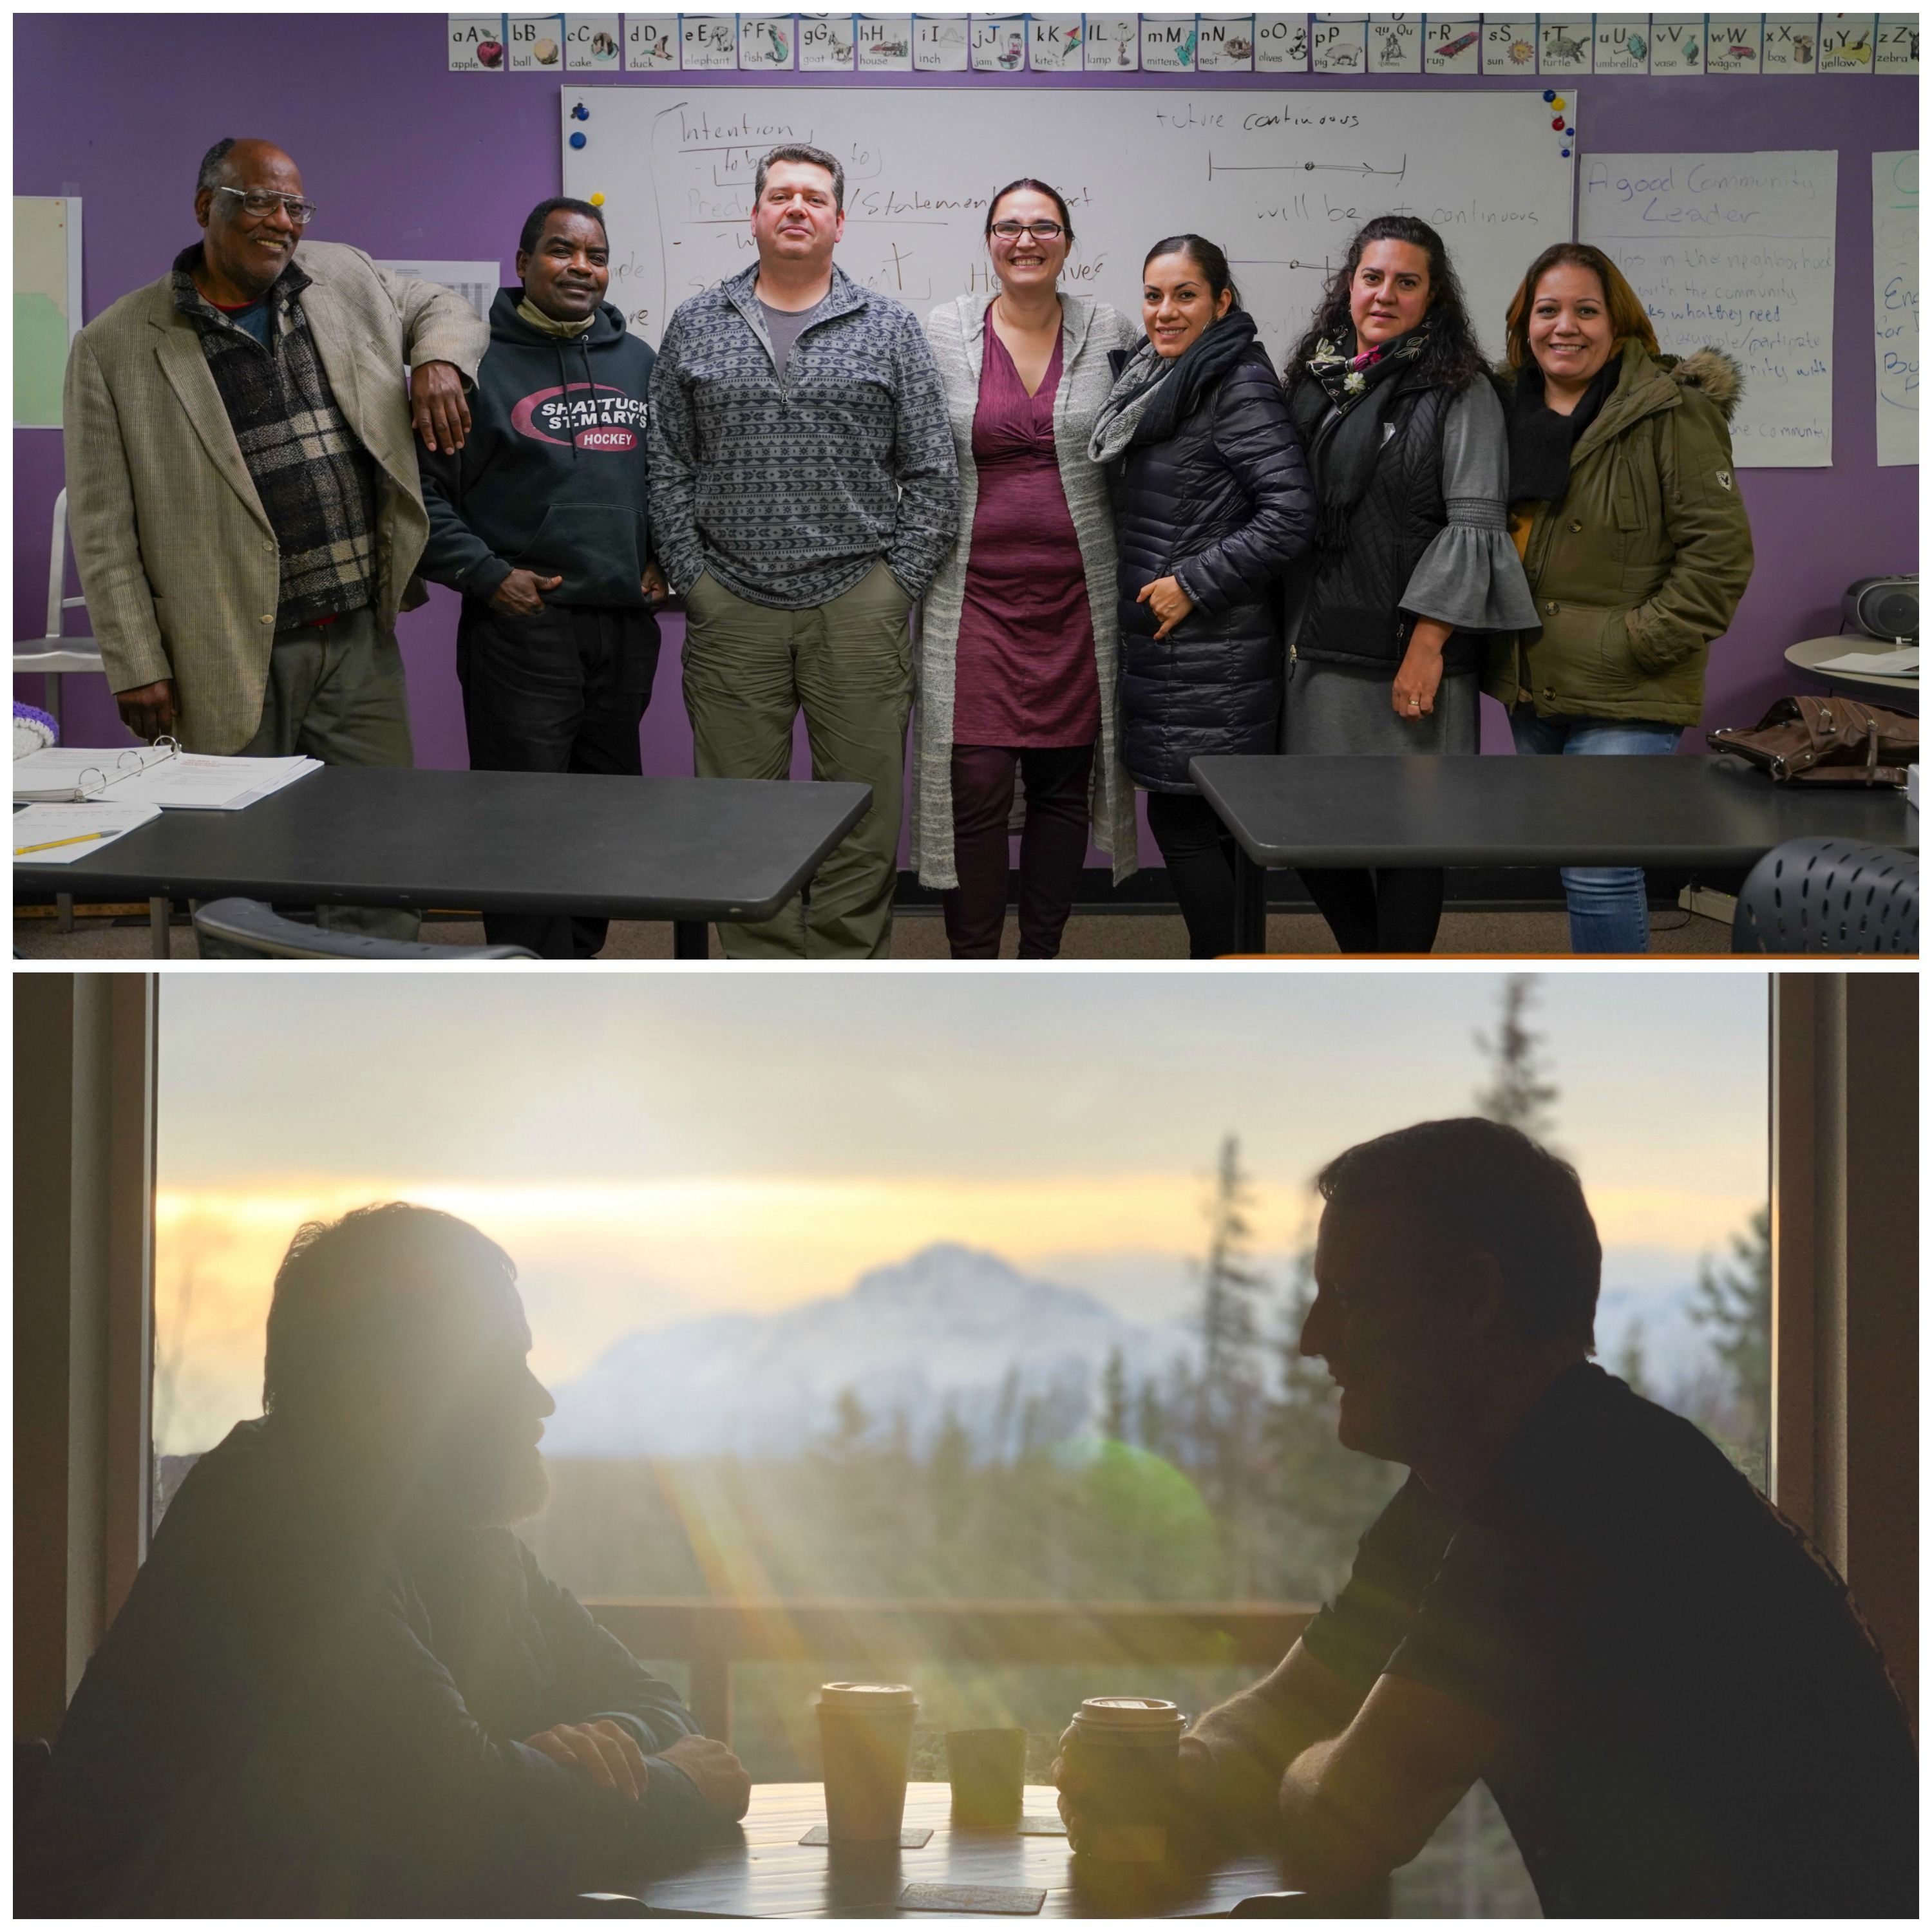 Image 1: seven adults stand in a classroom in a line and smile at the camera. Image 2: two men have a conversation over coffee at a table, with a window looking out on mountains behind them. 